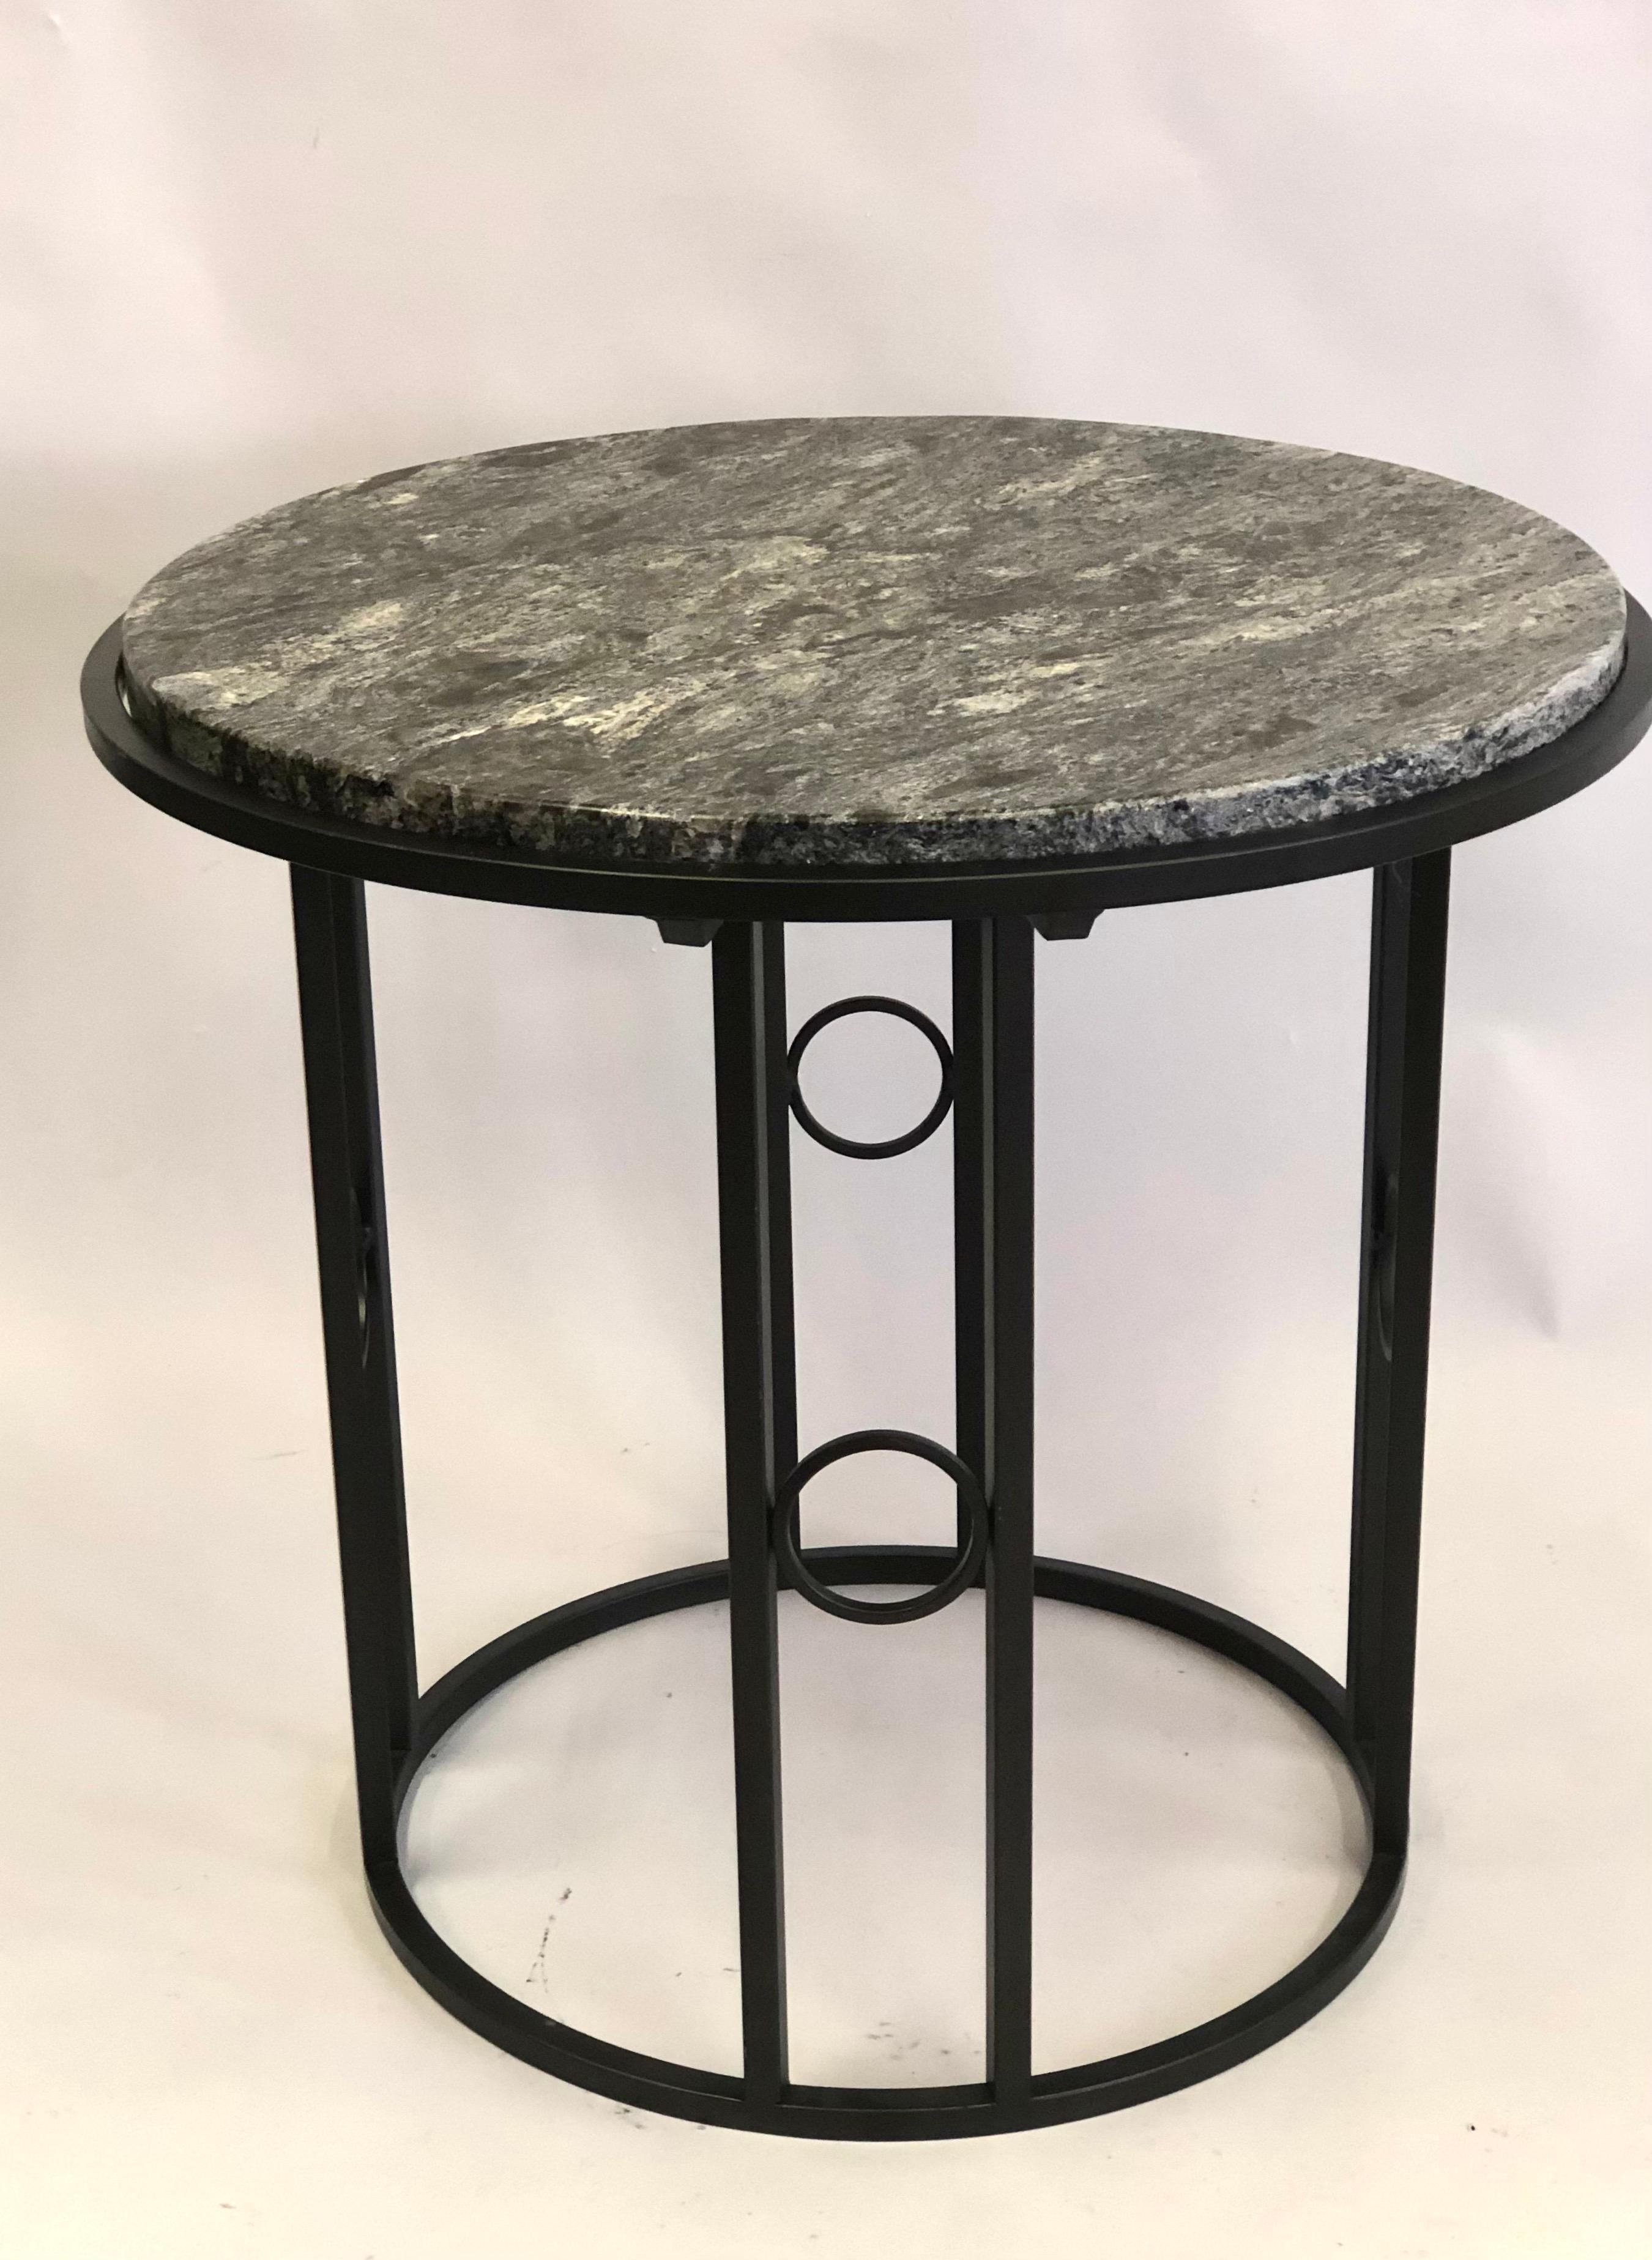 Pair of French 1930 Late Art Deco / Modern Neoclassical side or end tables. The tables offer a sober, pure, minimal presentation. The wrought iron bases are arranged in a circular form with 4 pairs of iron bar supports each united by interior round